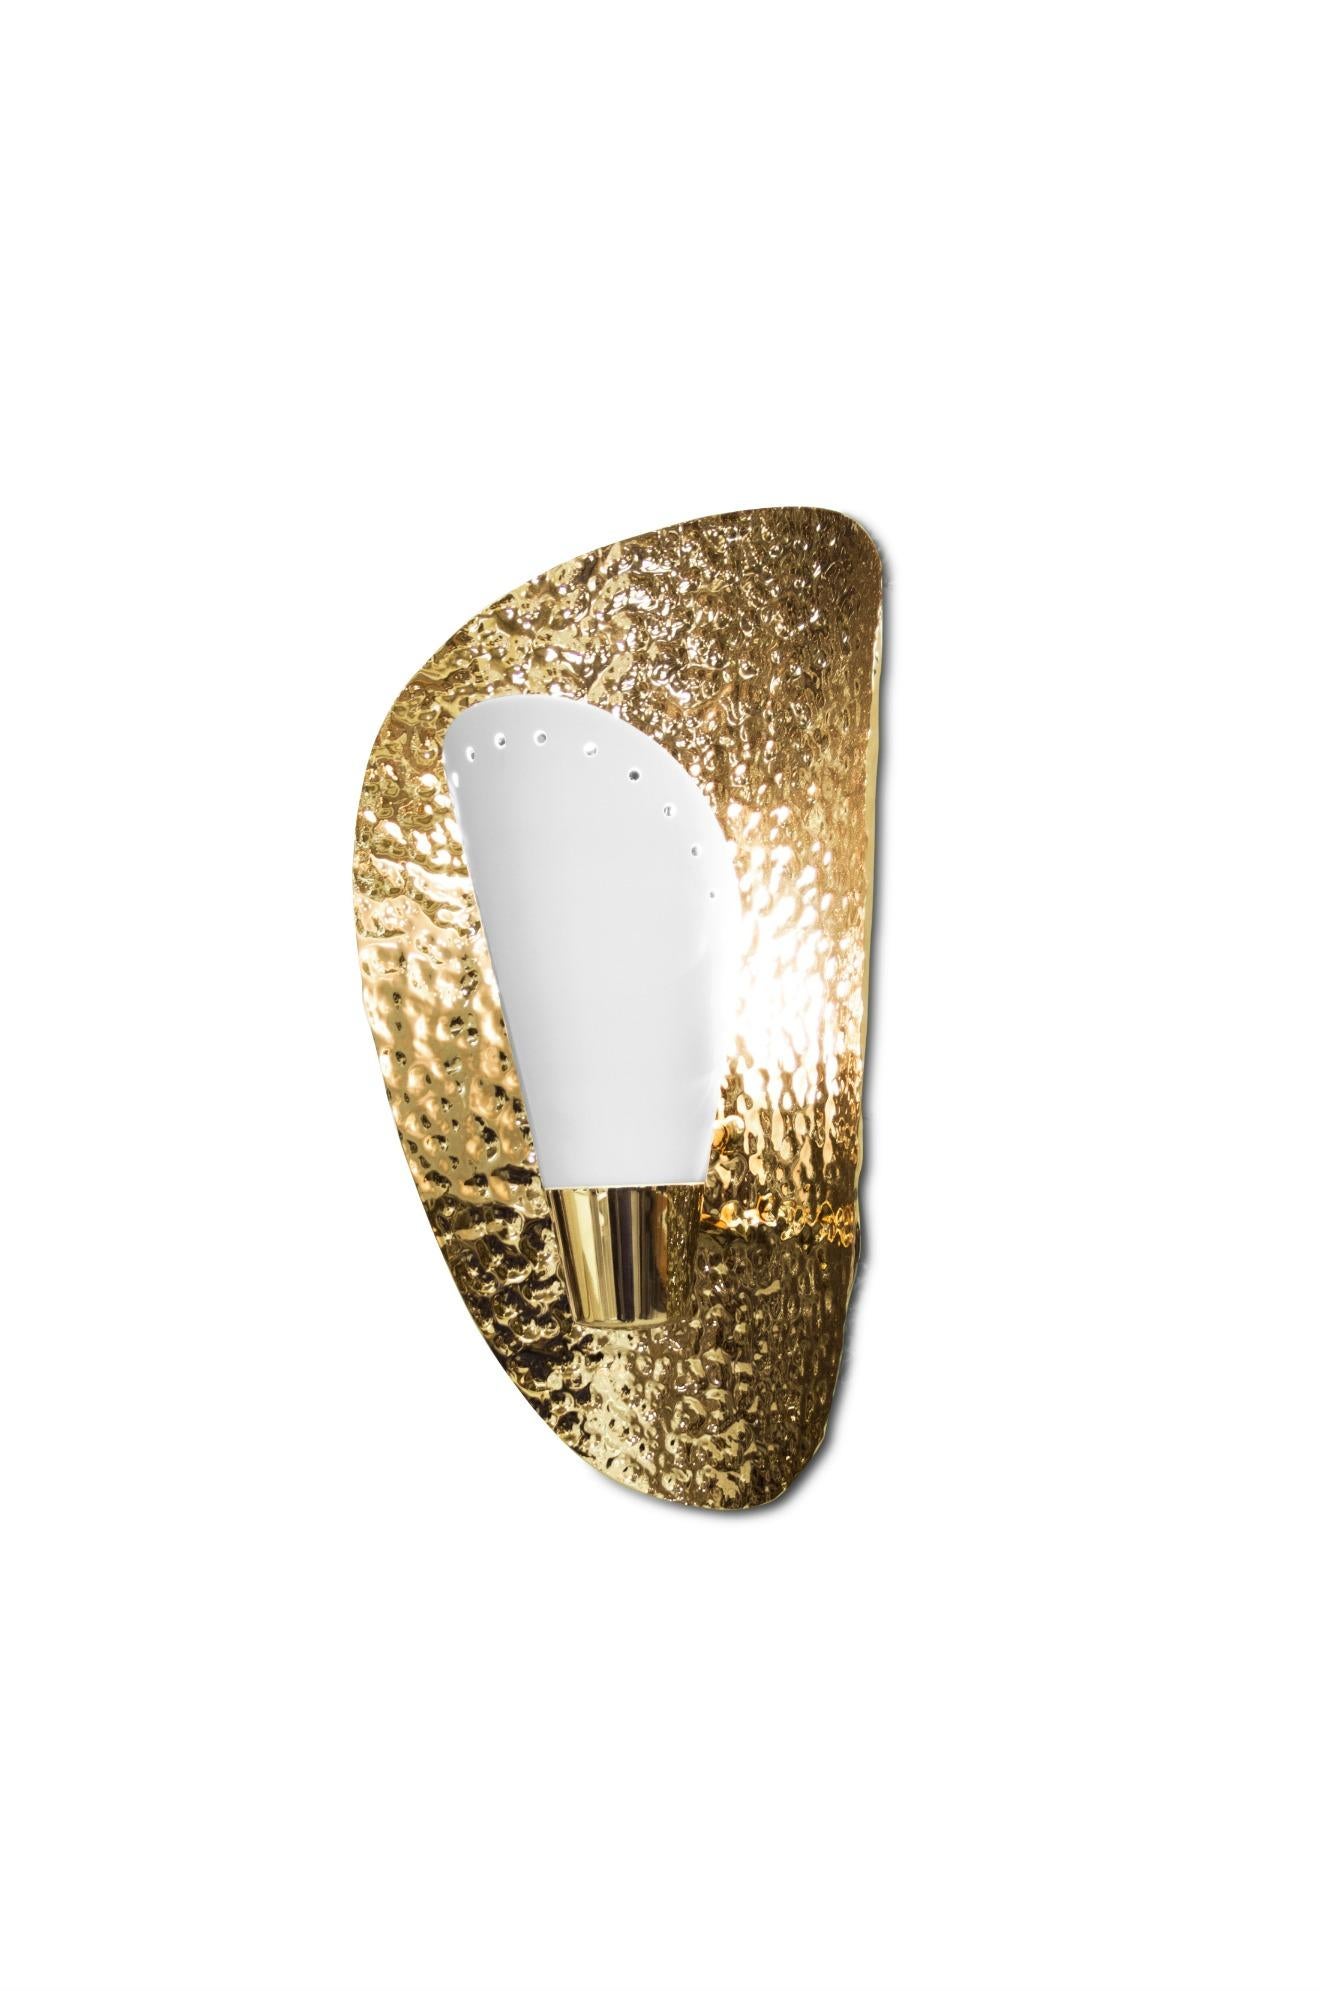 Portuguese Aruna Sconce in Hammered Brass Shell by Brabbu For Sale